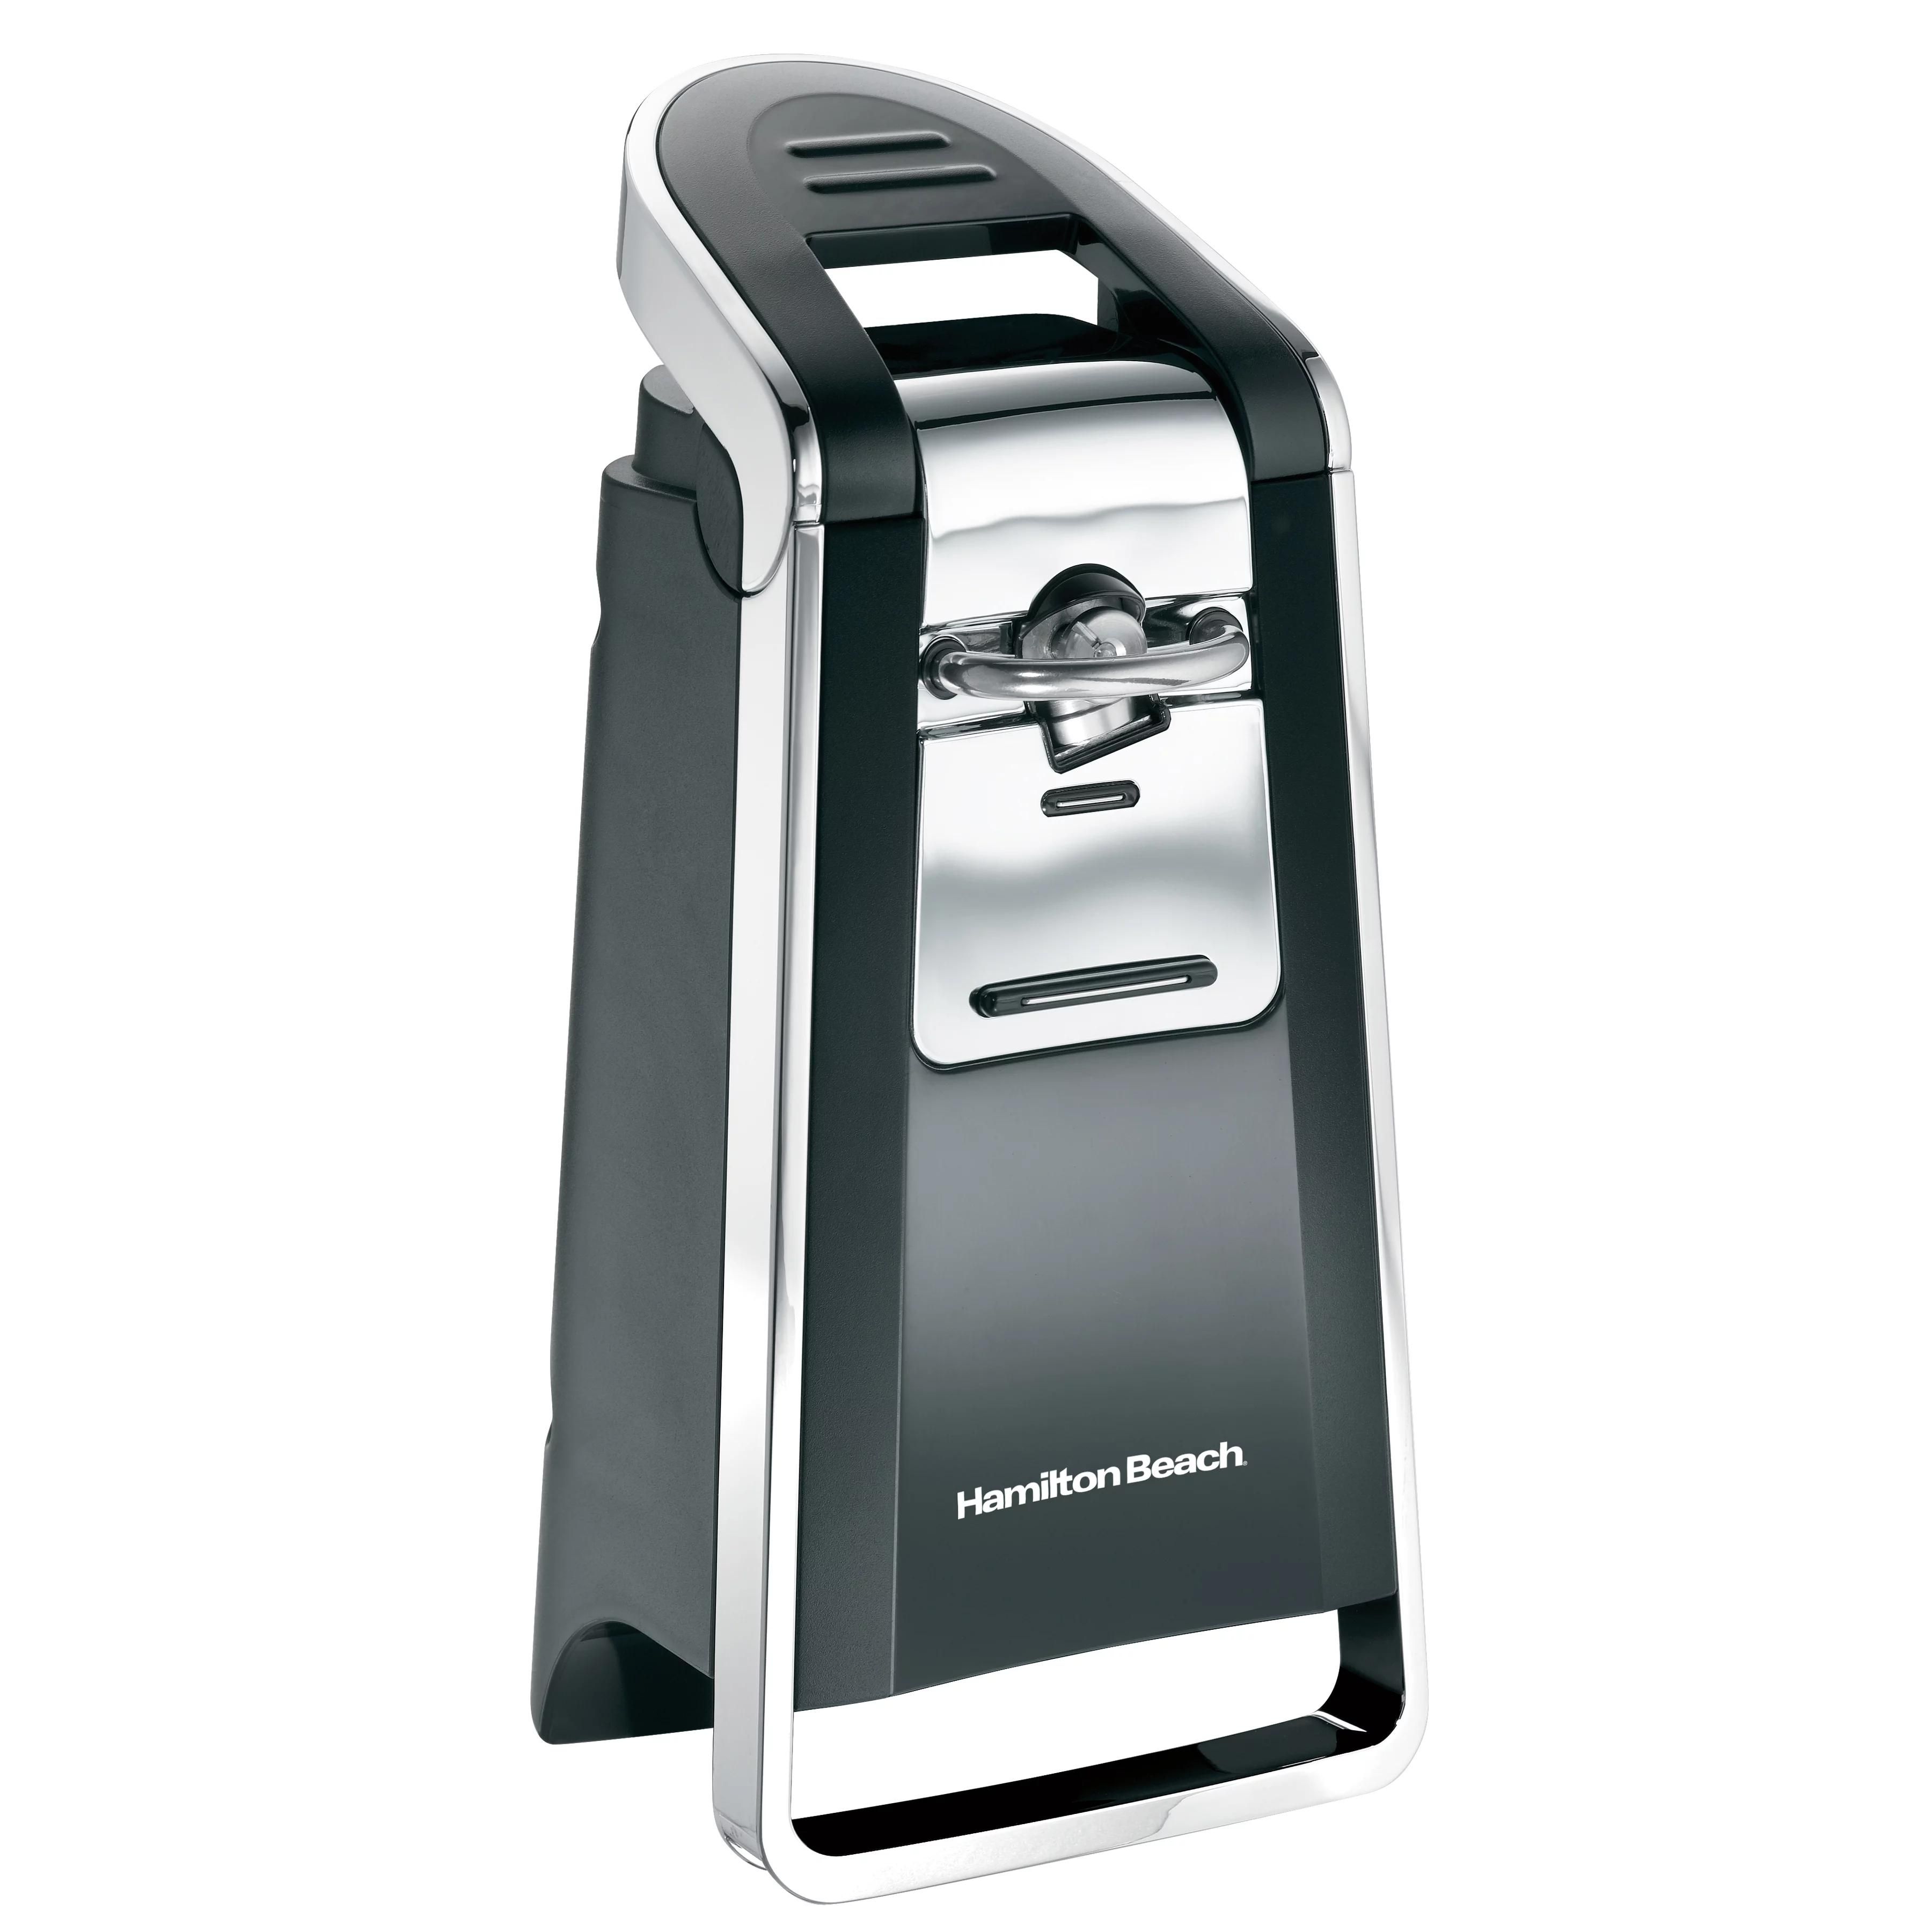 SSqkei Can Opener Electric Can Opener Full Restaurant Can Opener Automatic Can Opener 